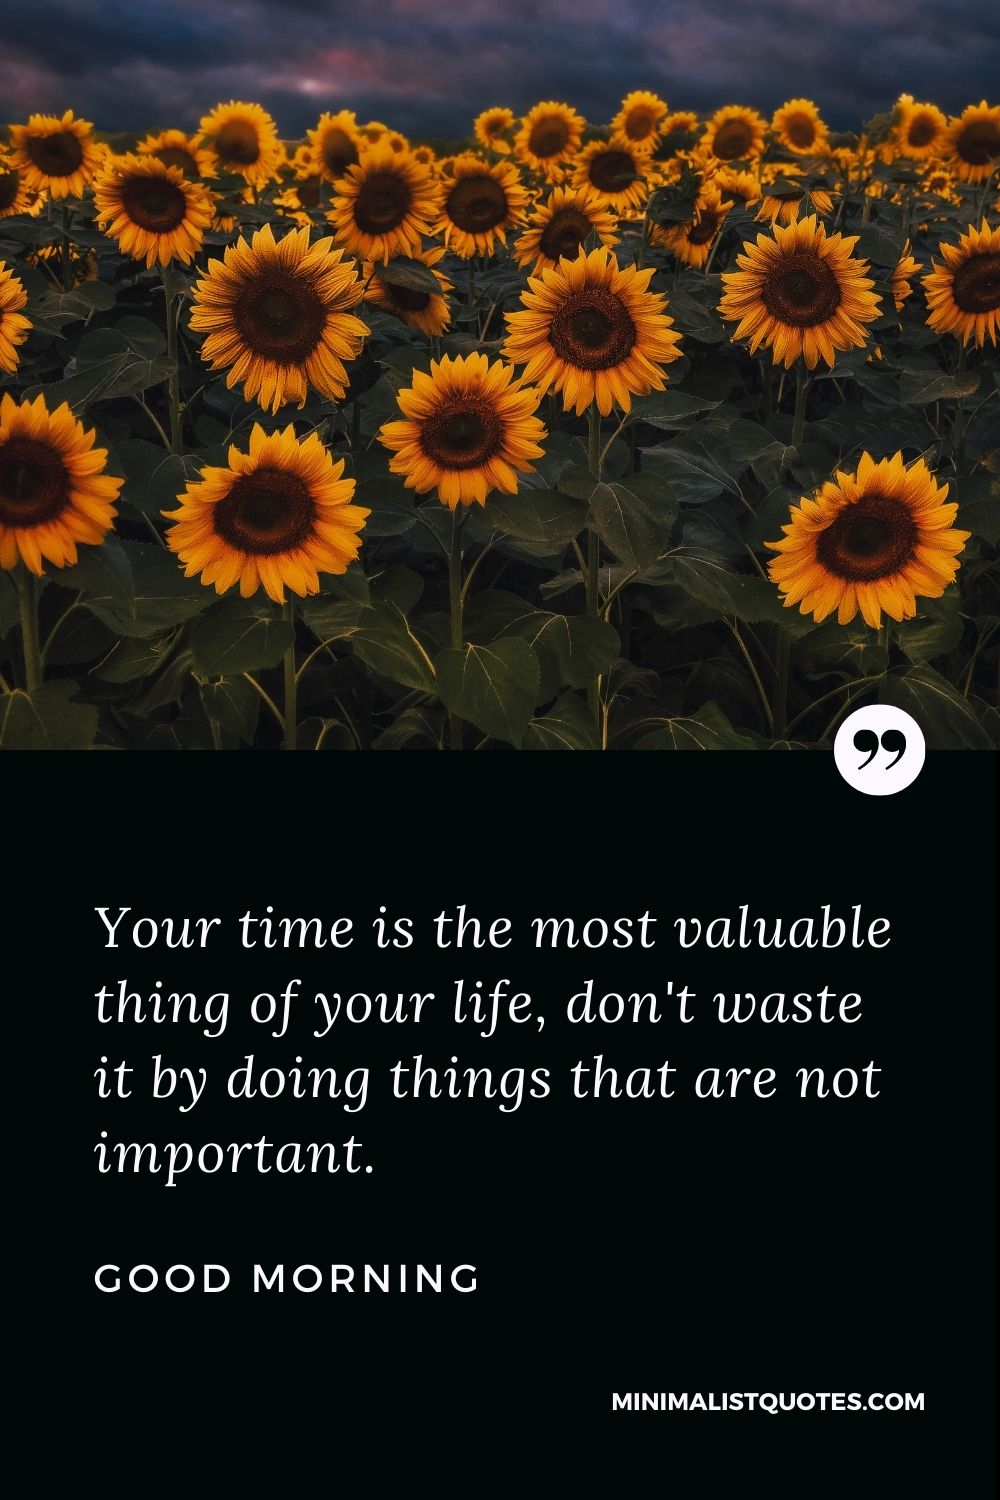 Good Morning Wish & Message With Image: Your time is the most valuable thing of your life, don't waste it by doing things that are not important.